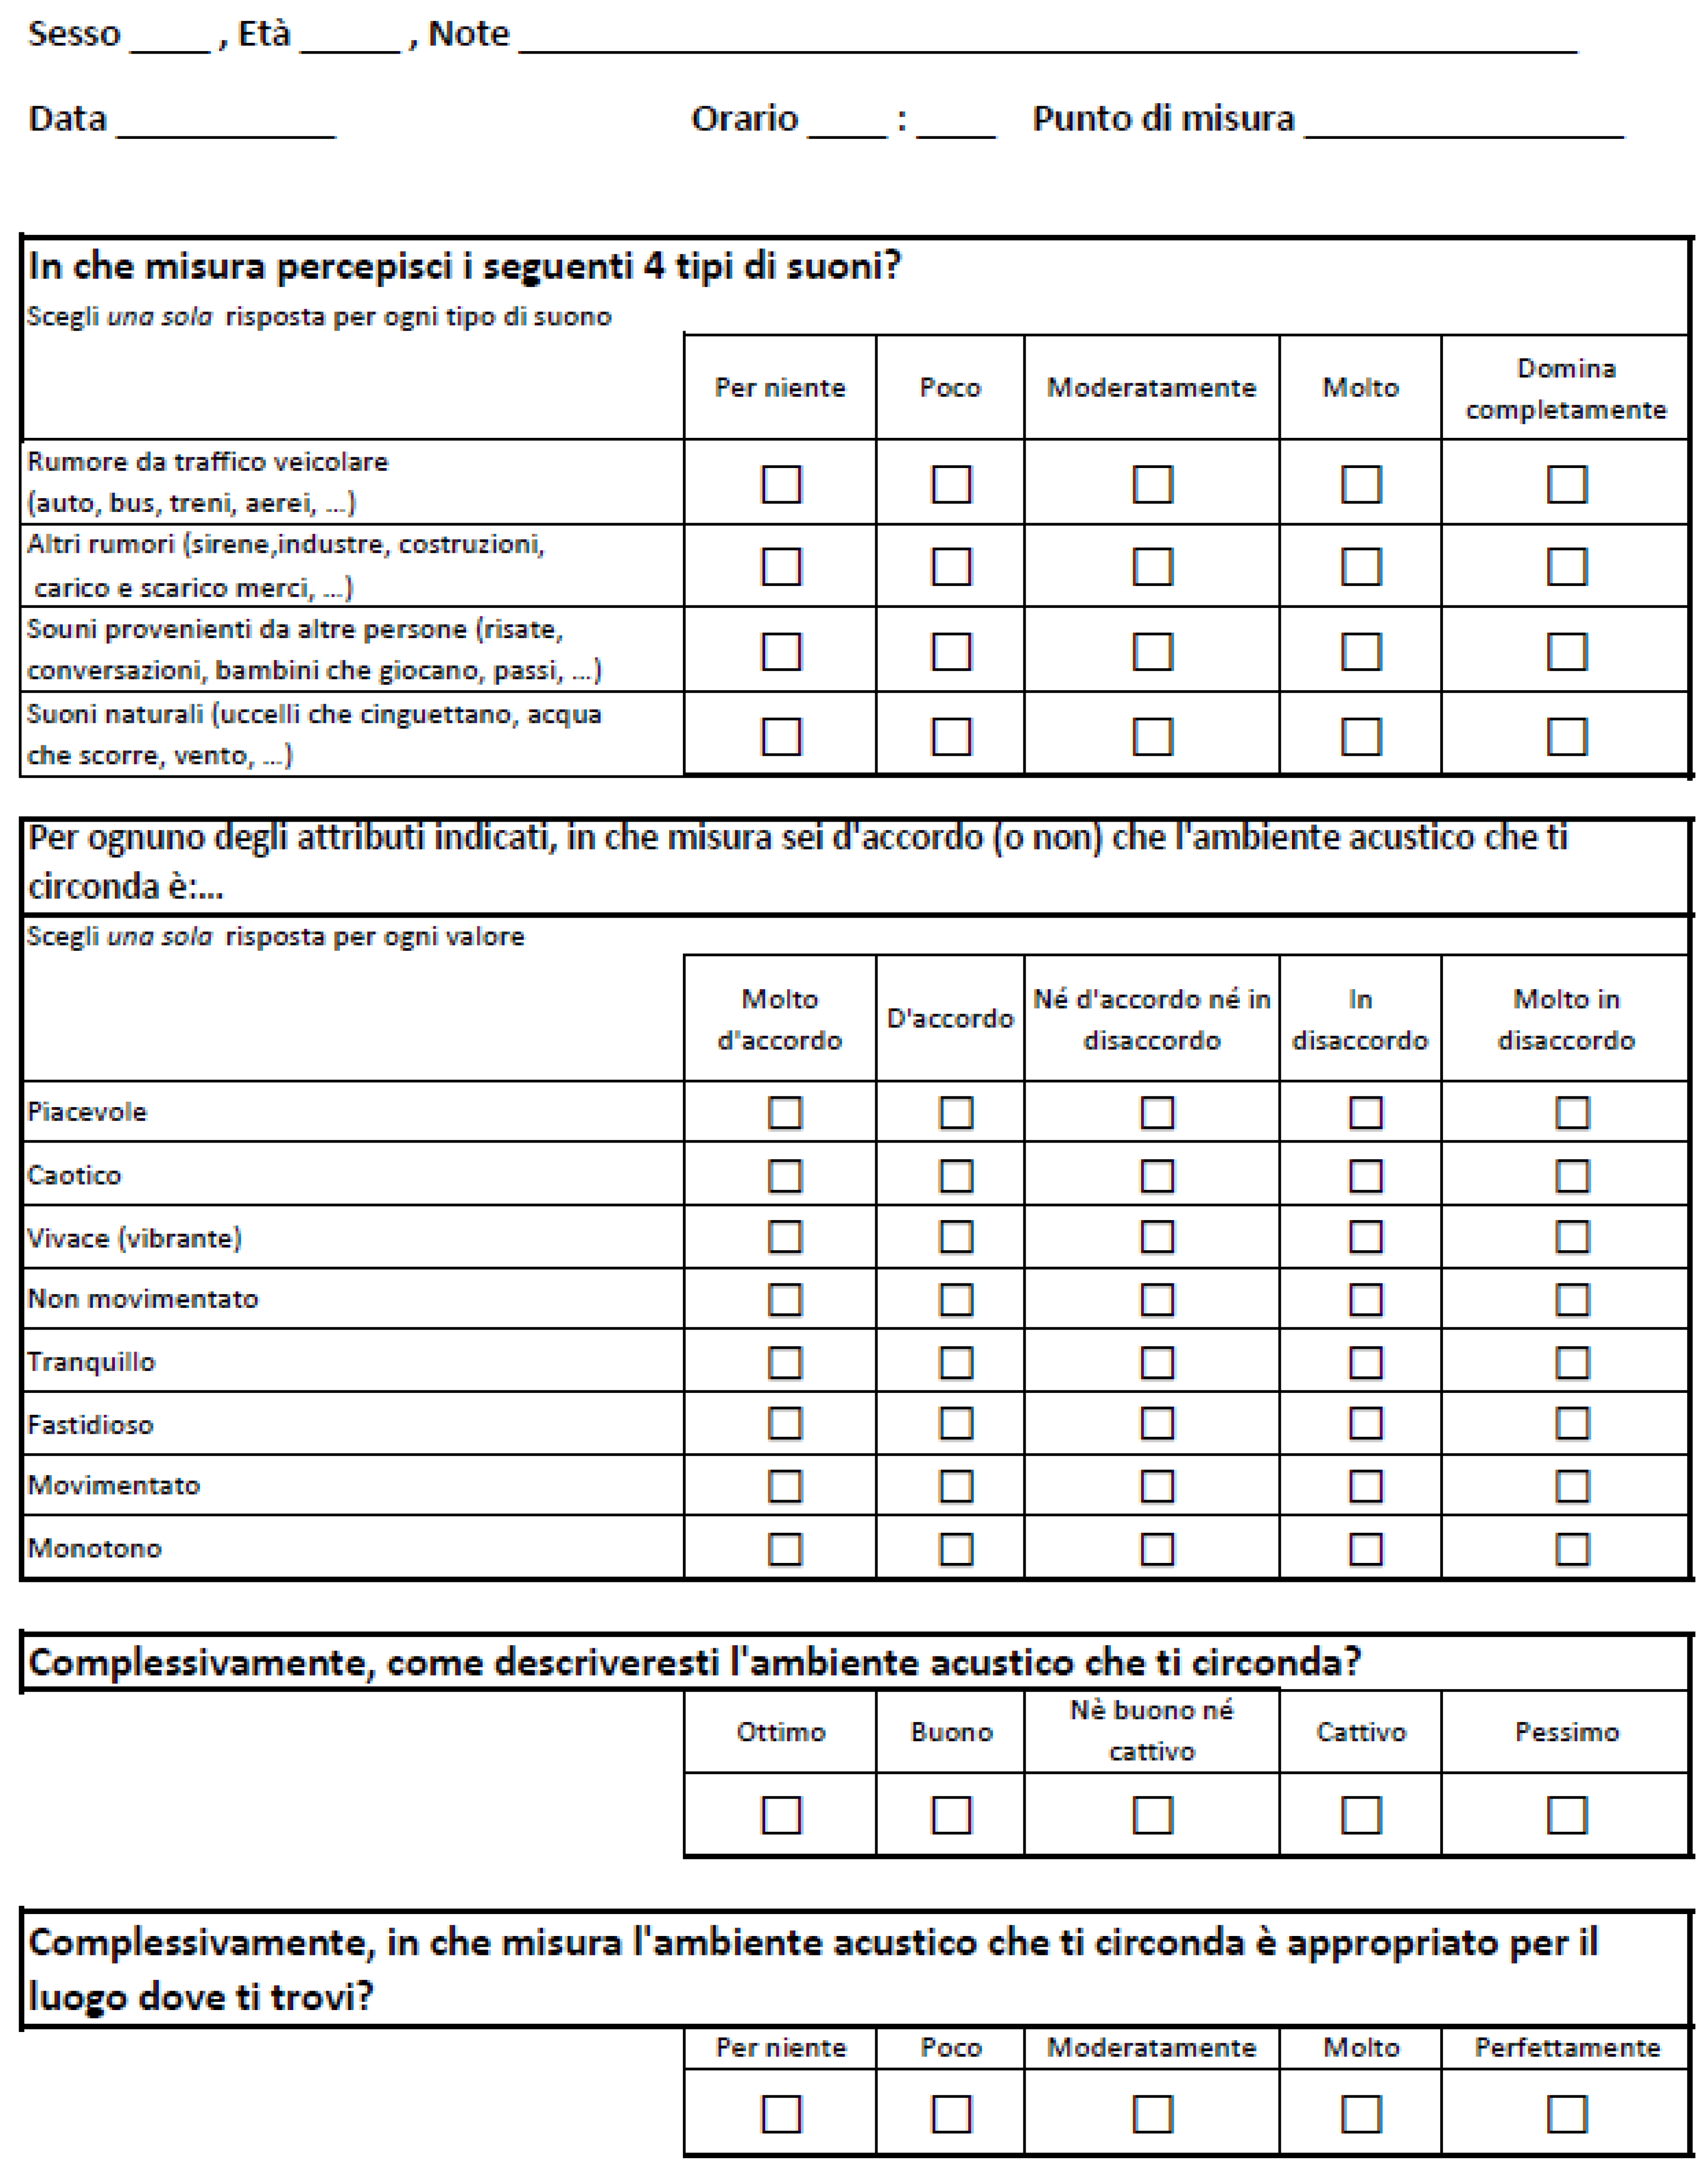 Sustainability Free Full Text Soundwalk Questionnaires And Noise Measurements In A University Campus A Soundscape Study Html